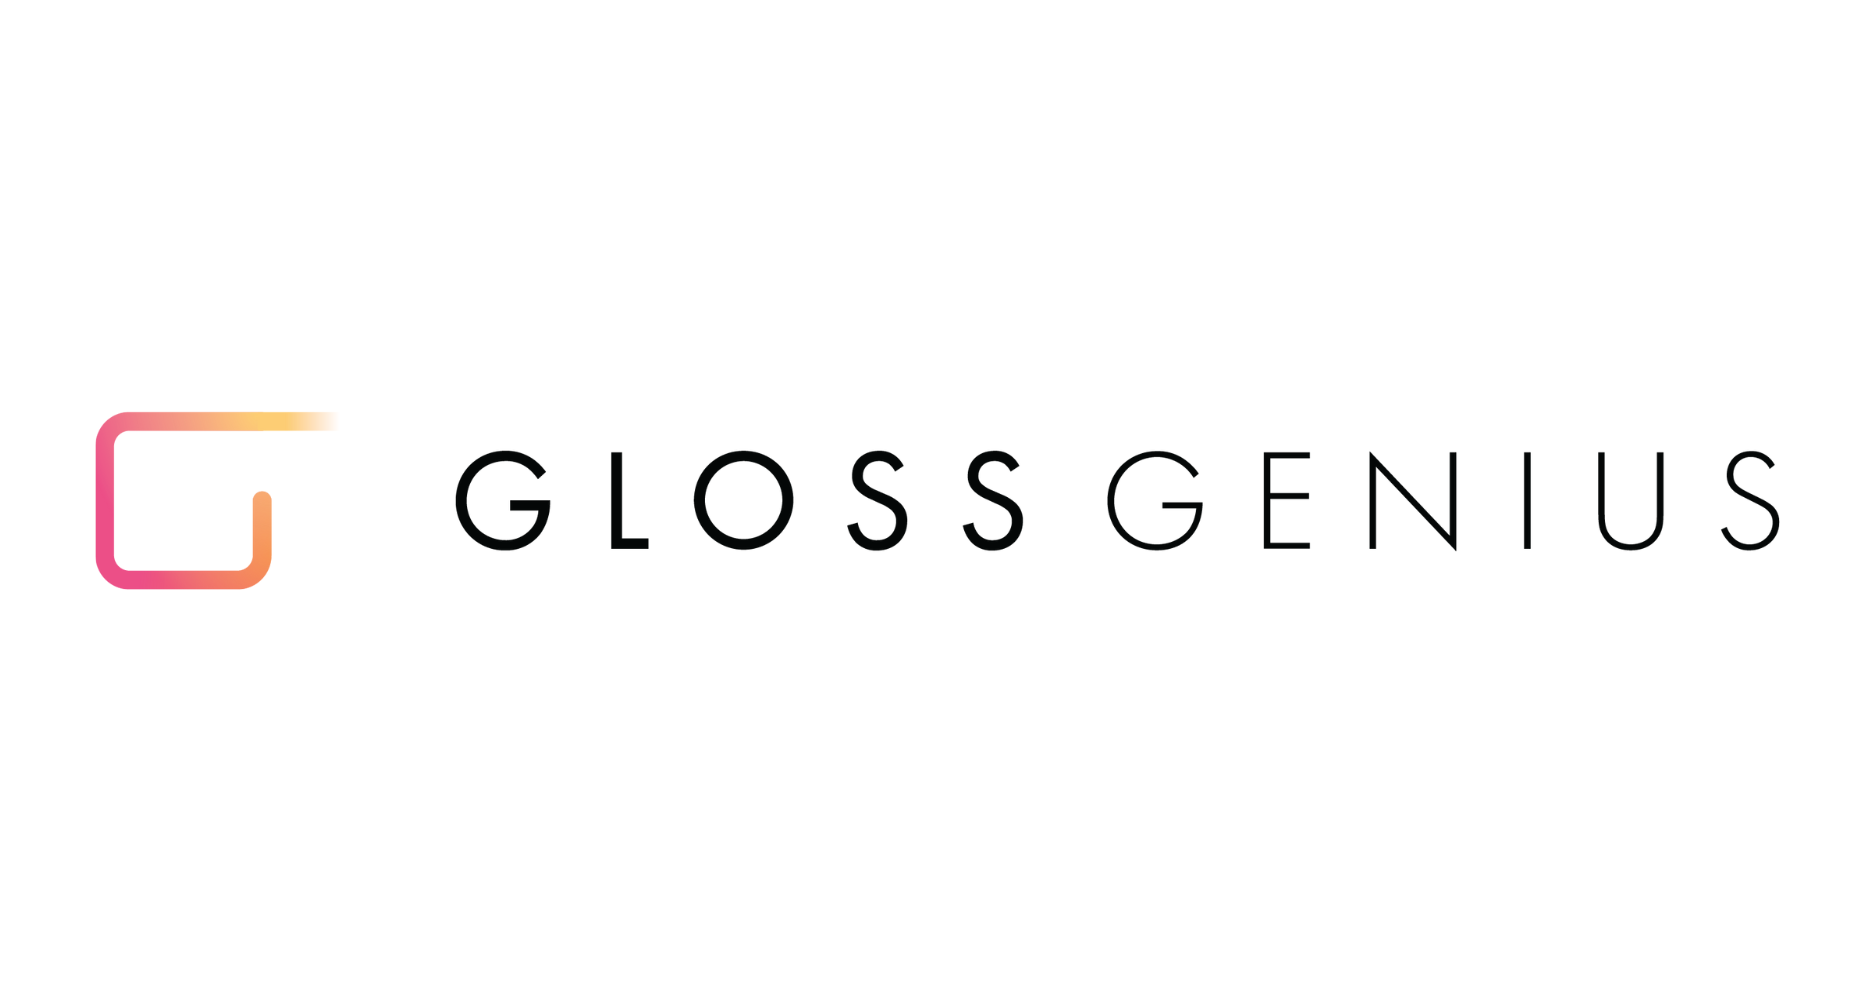 2022 year in review portfolio company highlights section gloss genius